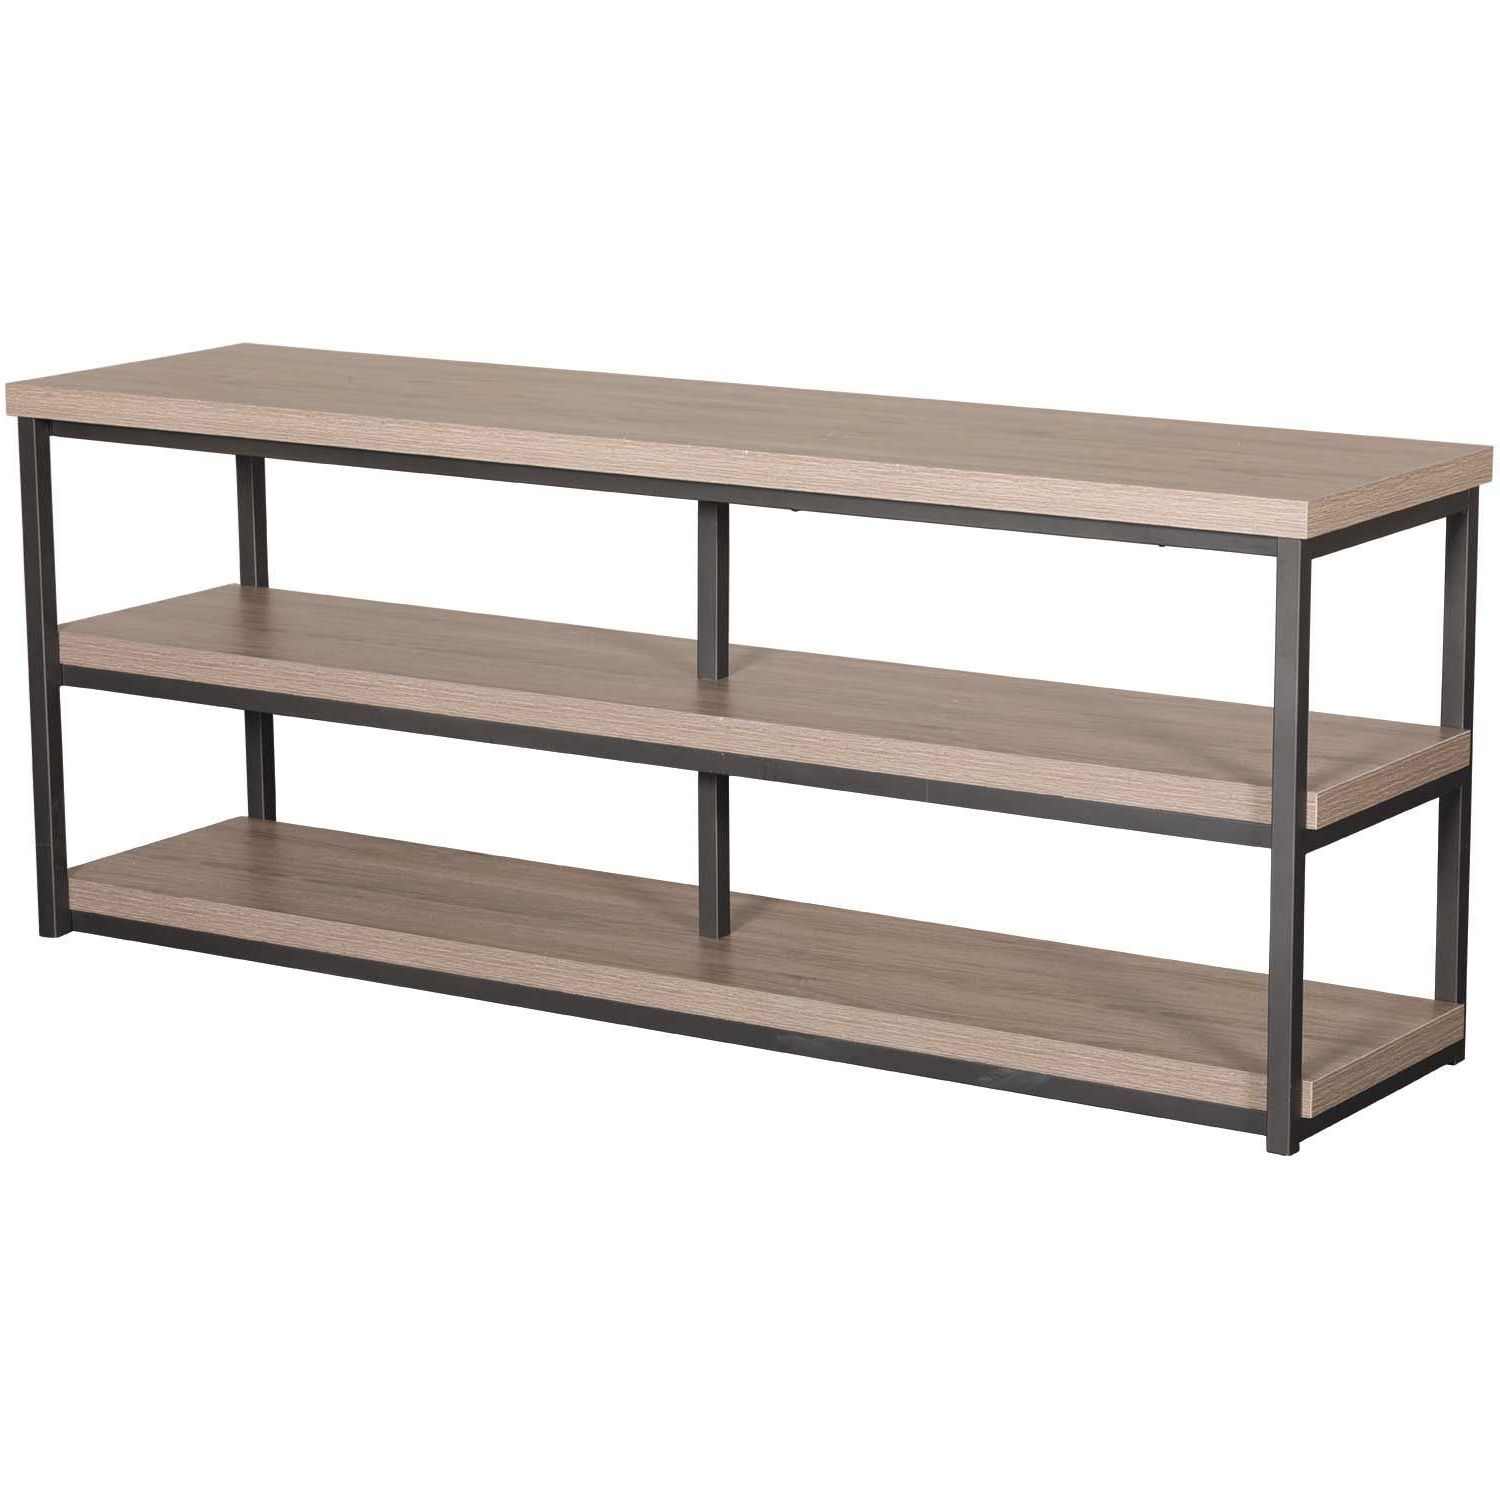 Ameriwood With Regard To Most Recent Rustic Oak Tv Stands (View 19 of 20)